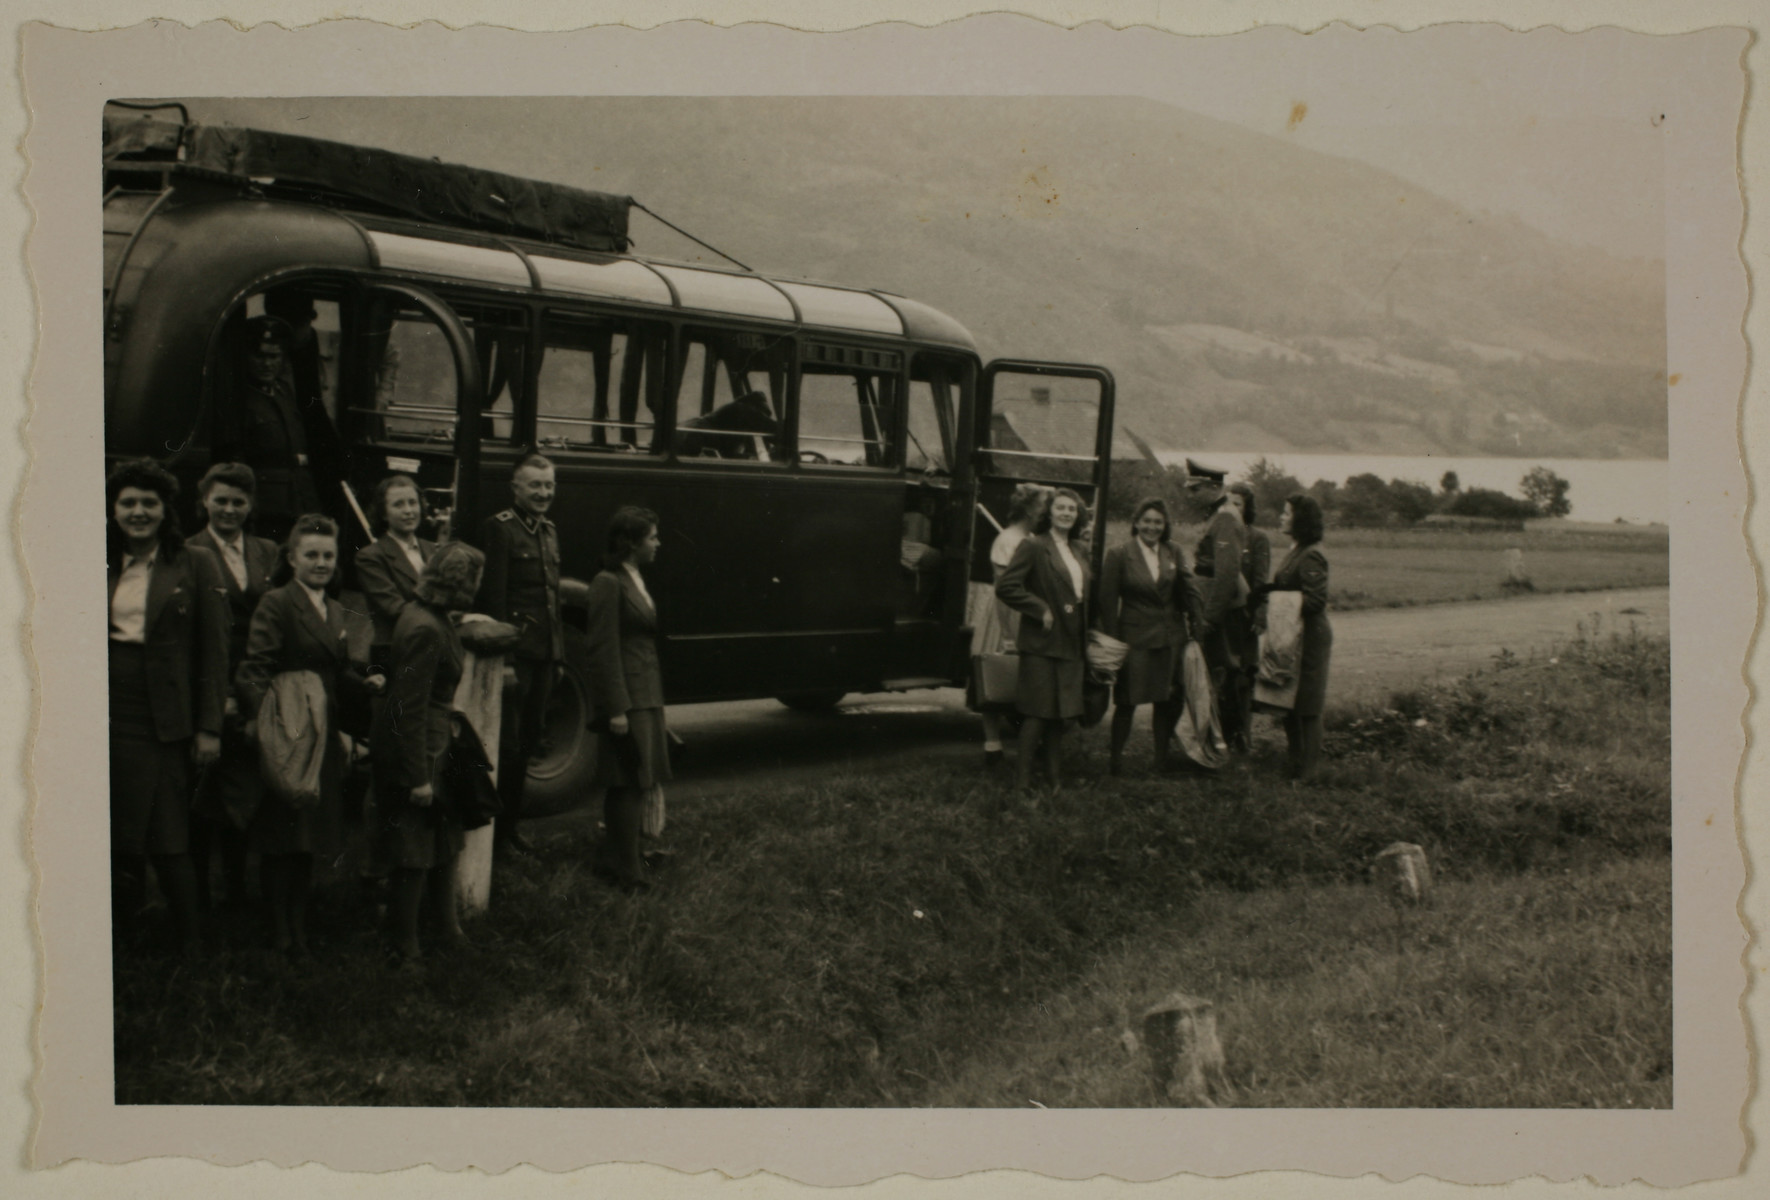 Members of the SS Helferinnen (female auxiliaries) arrive by bus at Solahuette, the SS retreat near Auschwitz. 

The original caption reads "Mit den SS Maiden auf der Solahuette 22.7.44" [with the SS maiden in Solahuette 22.7.44].